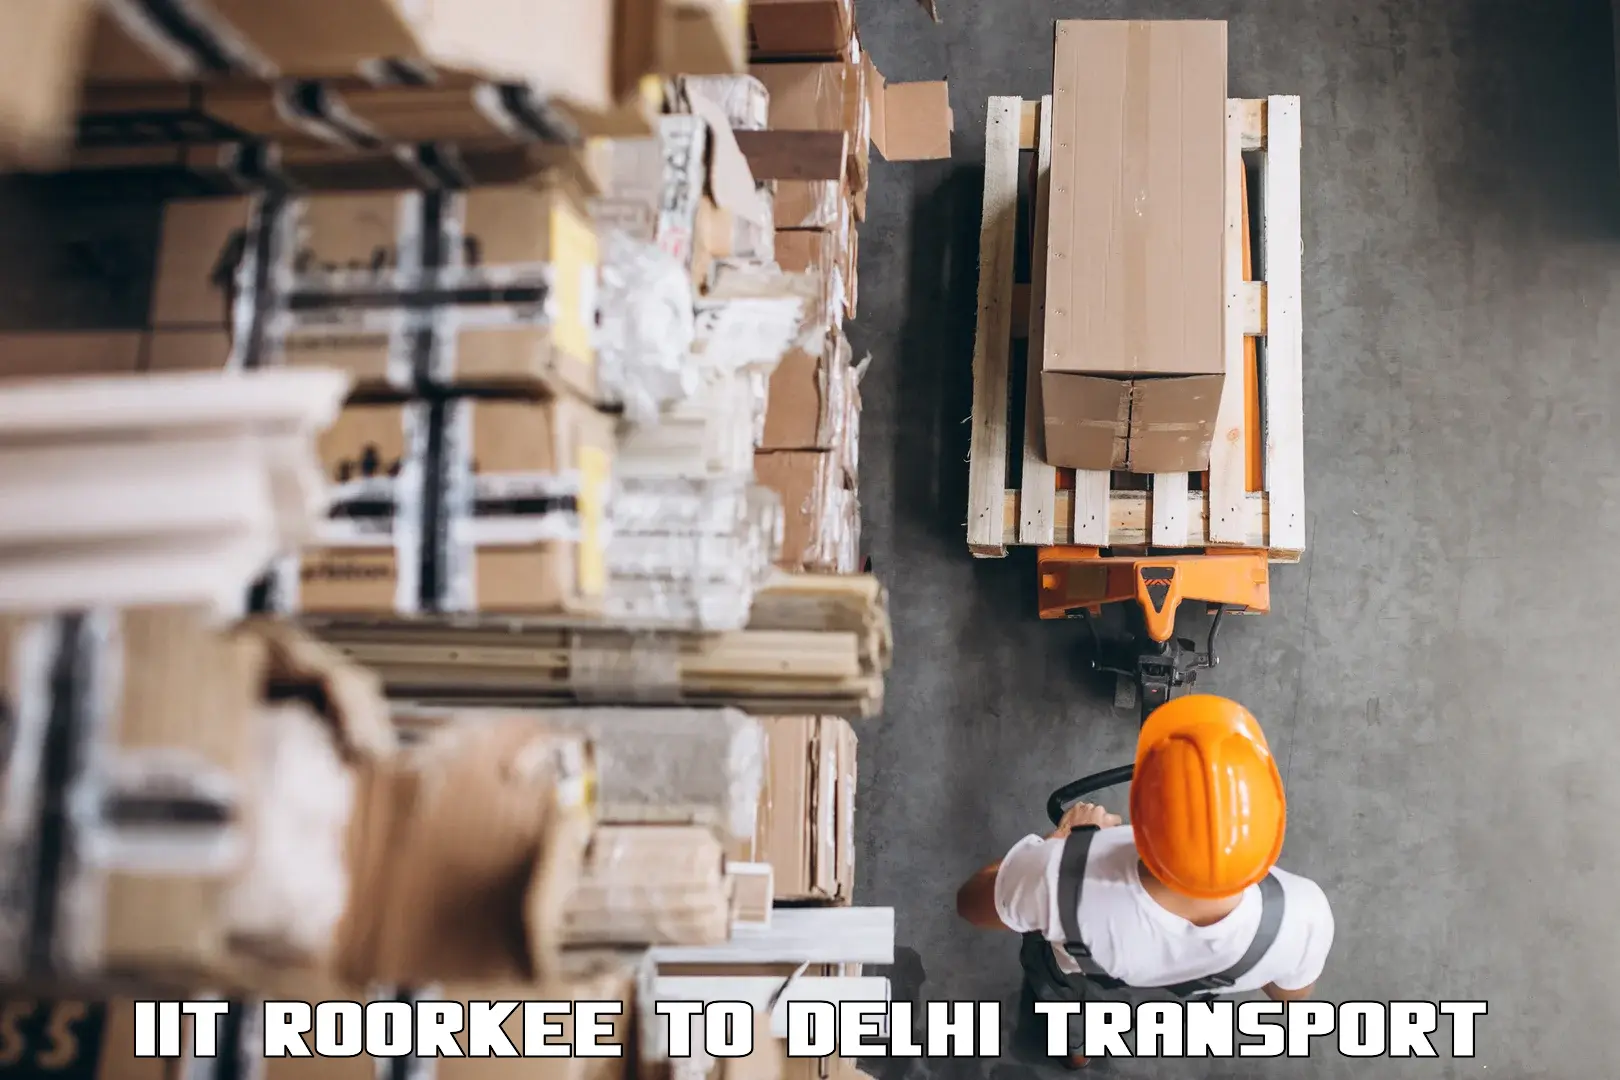 Daily parcel service transport IIT Roorkee to Lodhi Road